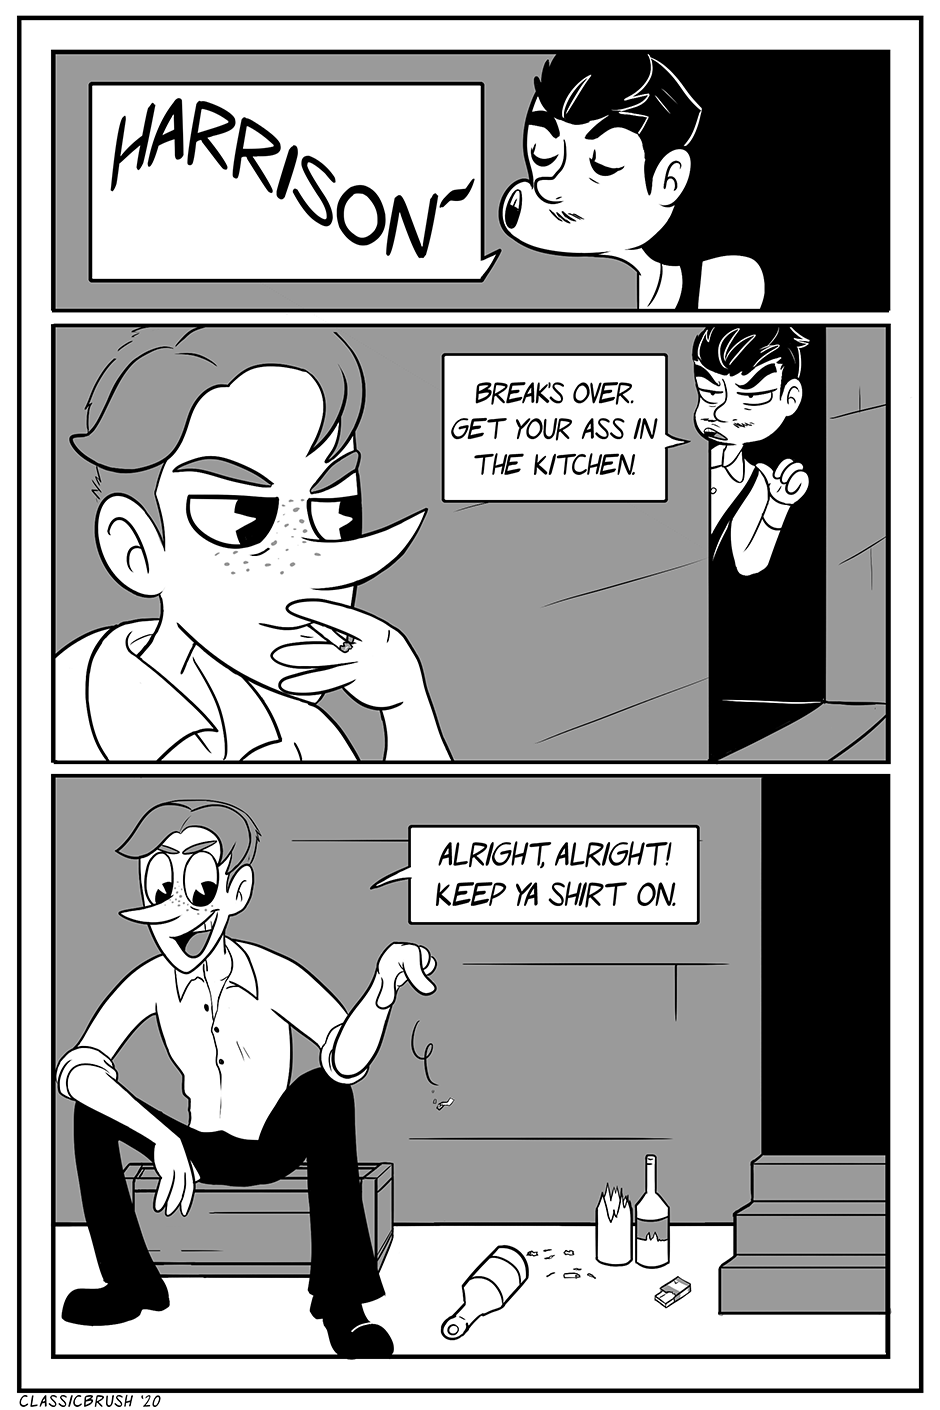 Panel 1: A black haired man sticks his head out from a back door to get the attention of someone. â€œHarrison~â€ Panel 2: The black haired man motions inside with an impatient expression towards a long nose man smoking a cigarette. â€œBreakâ€™s over. Get your ass in the kitchen.â€ Panel 3: The taller, long nosed man (Harrison) tosses his cigarette, sitting on a crate. â€œAlright, alright! Keep ya shirt on.â€